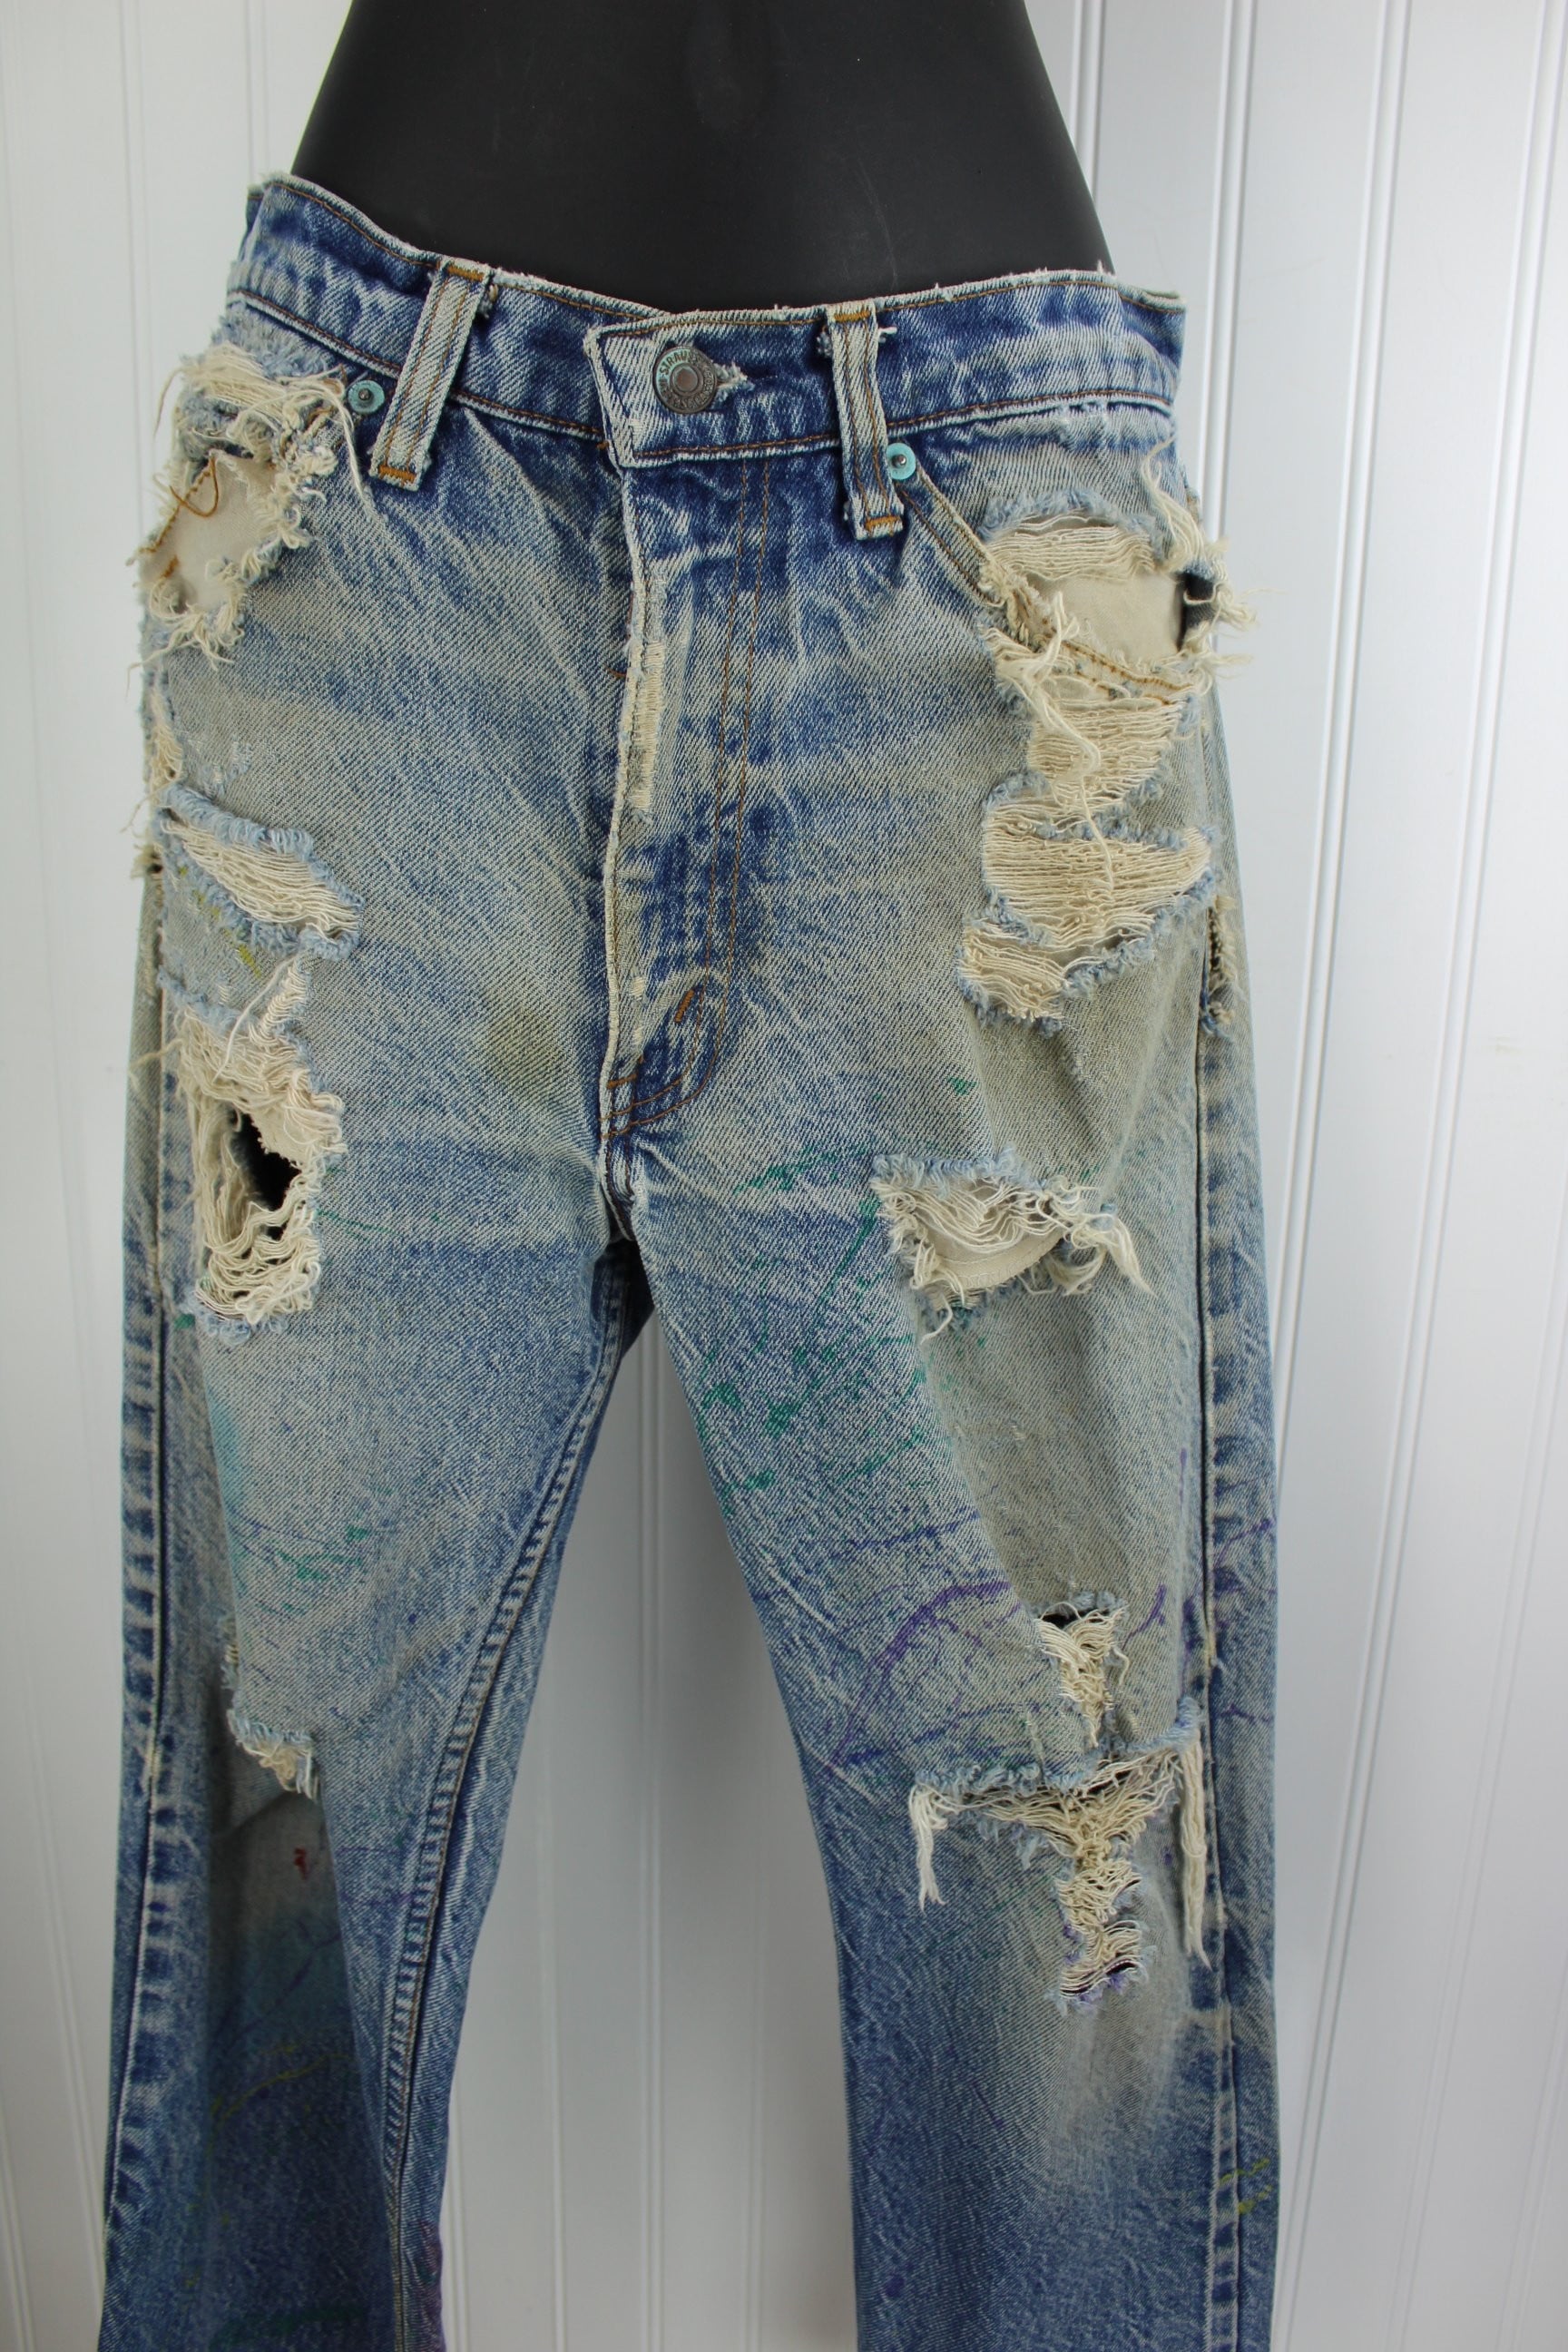 Vintage Levi's Skate Boarder Superbly Distressed Painted Jeans - Early 1990s - Waist 30" Orange Tab one of kind